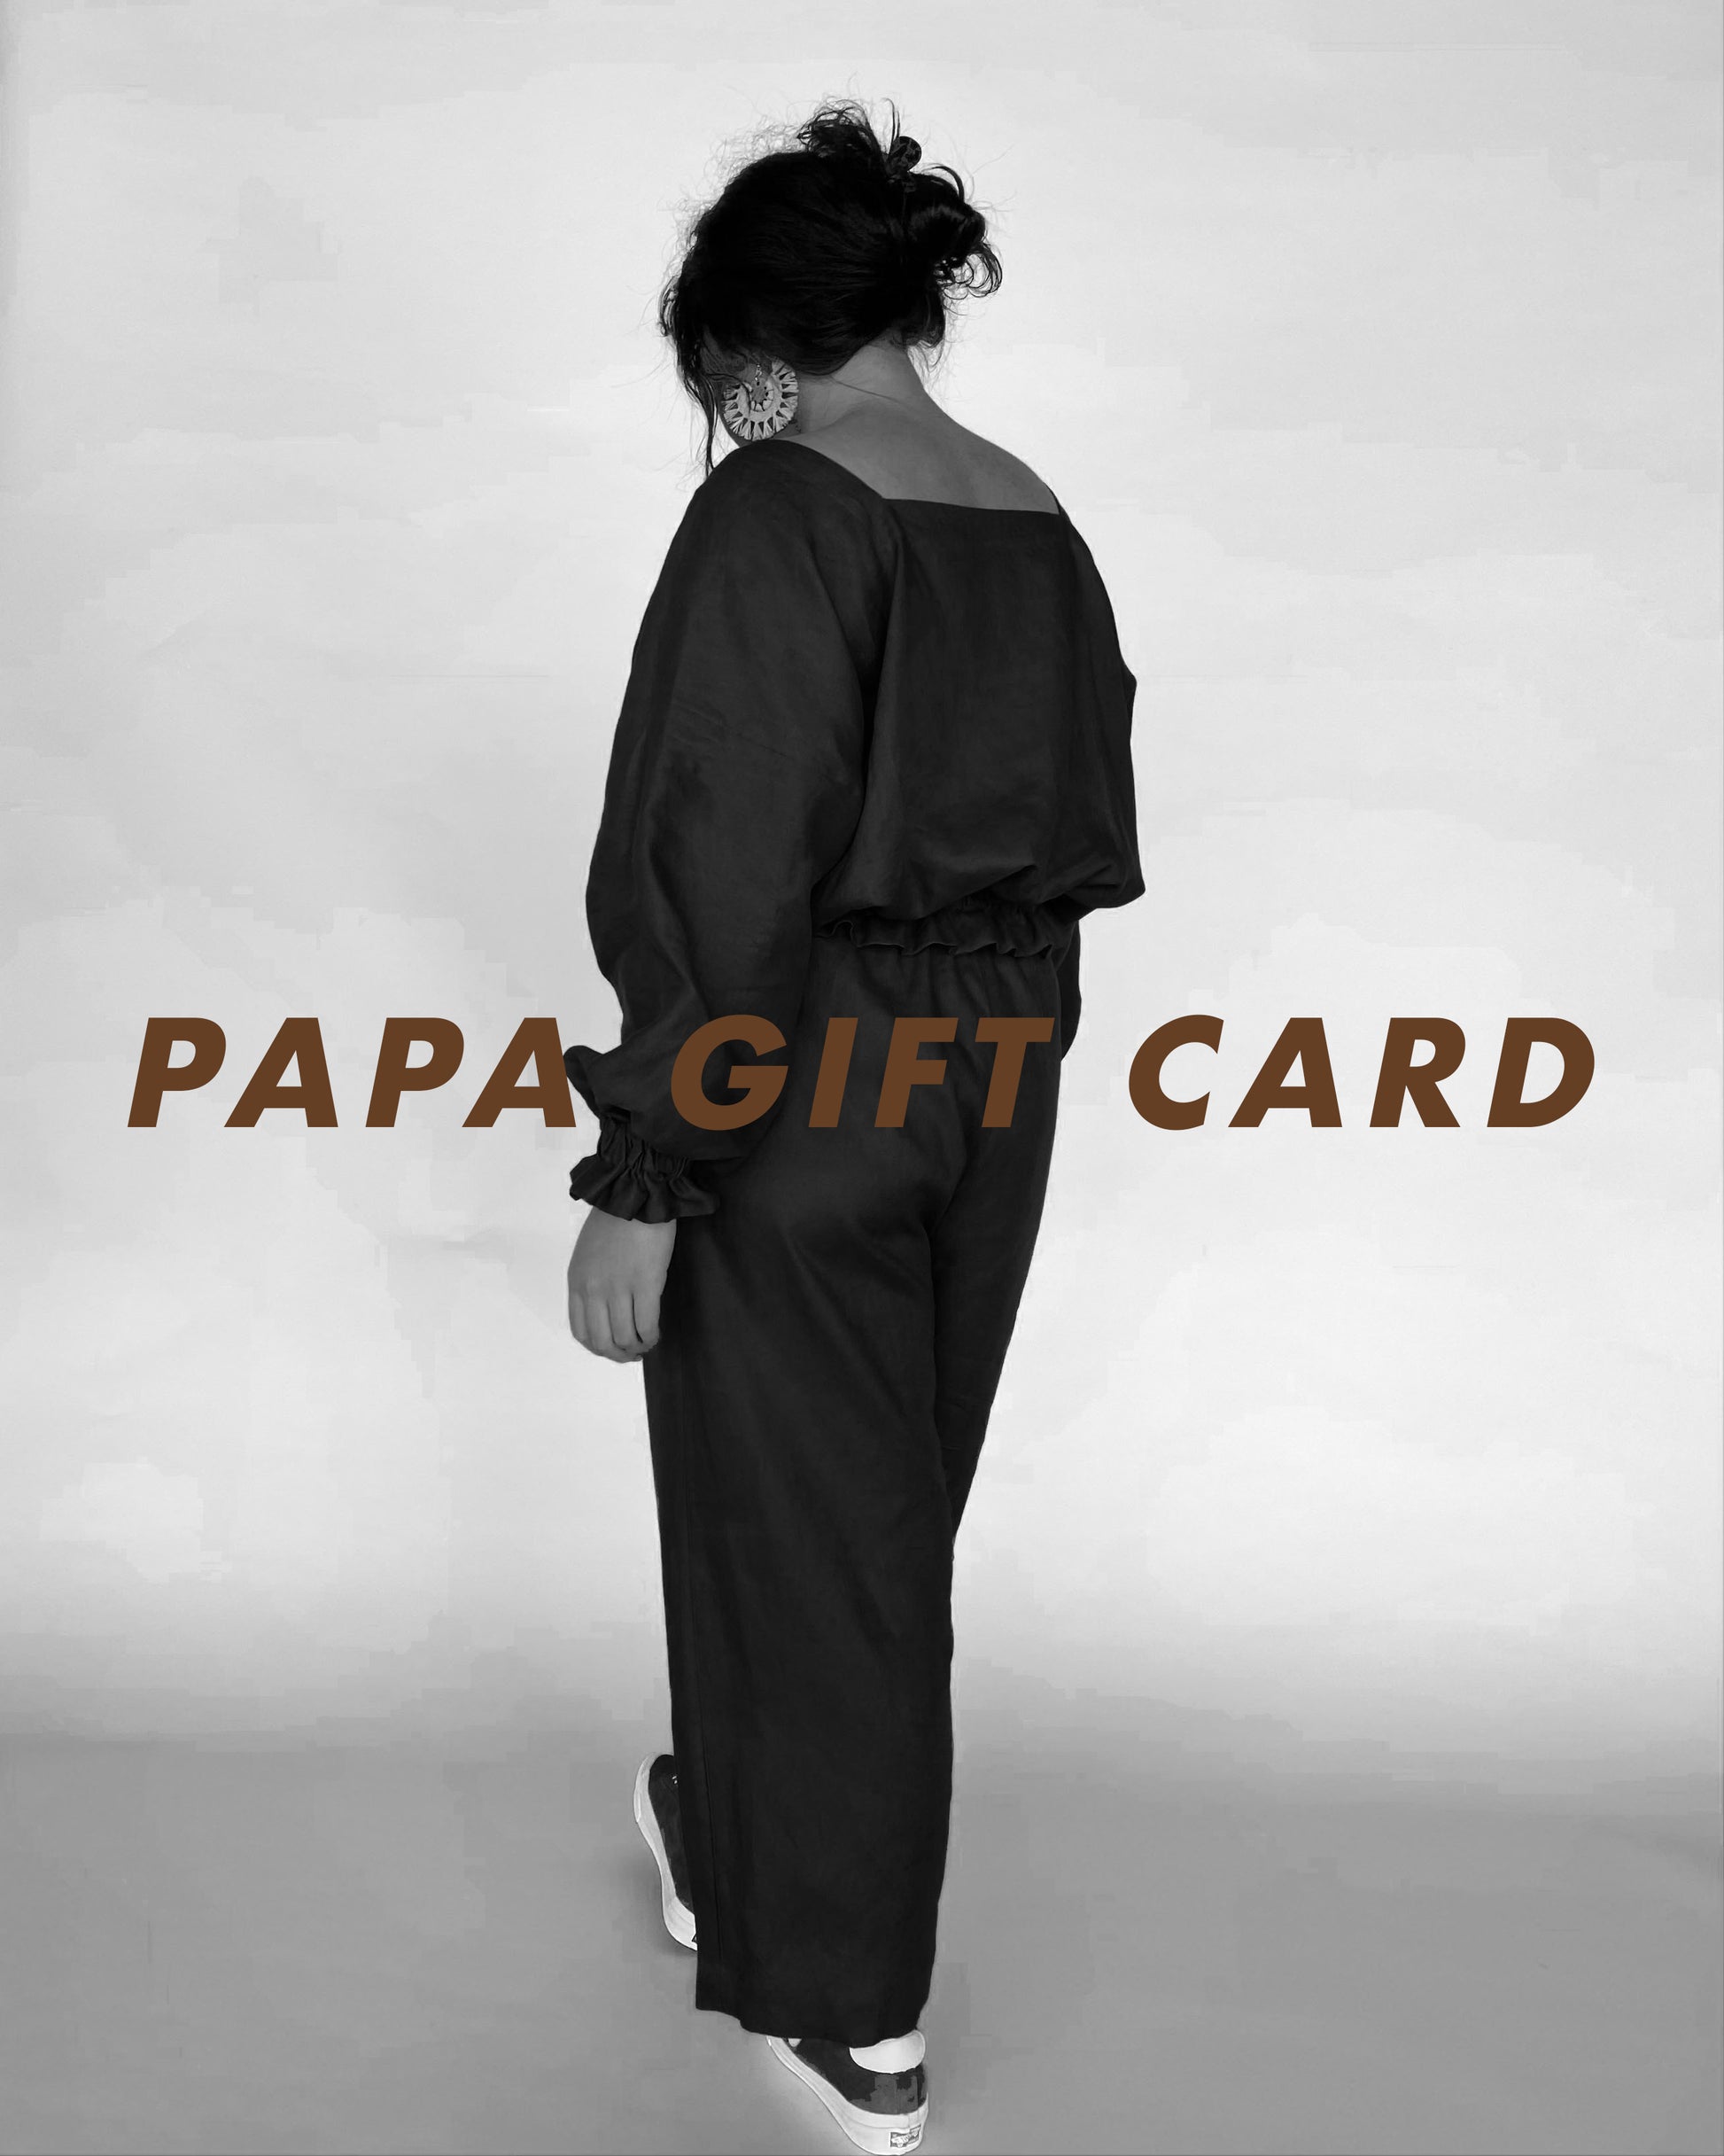 Jalaina wearing a papa clothing linen outfit with her back to the viewer. Text reading PAPA GIFT CARD written over image in brown text